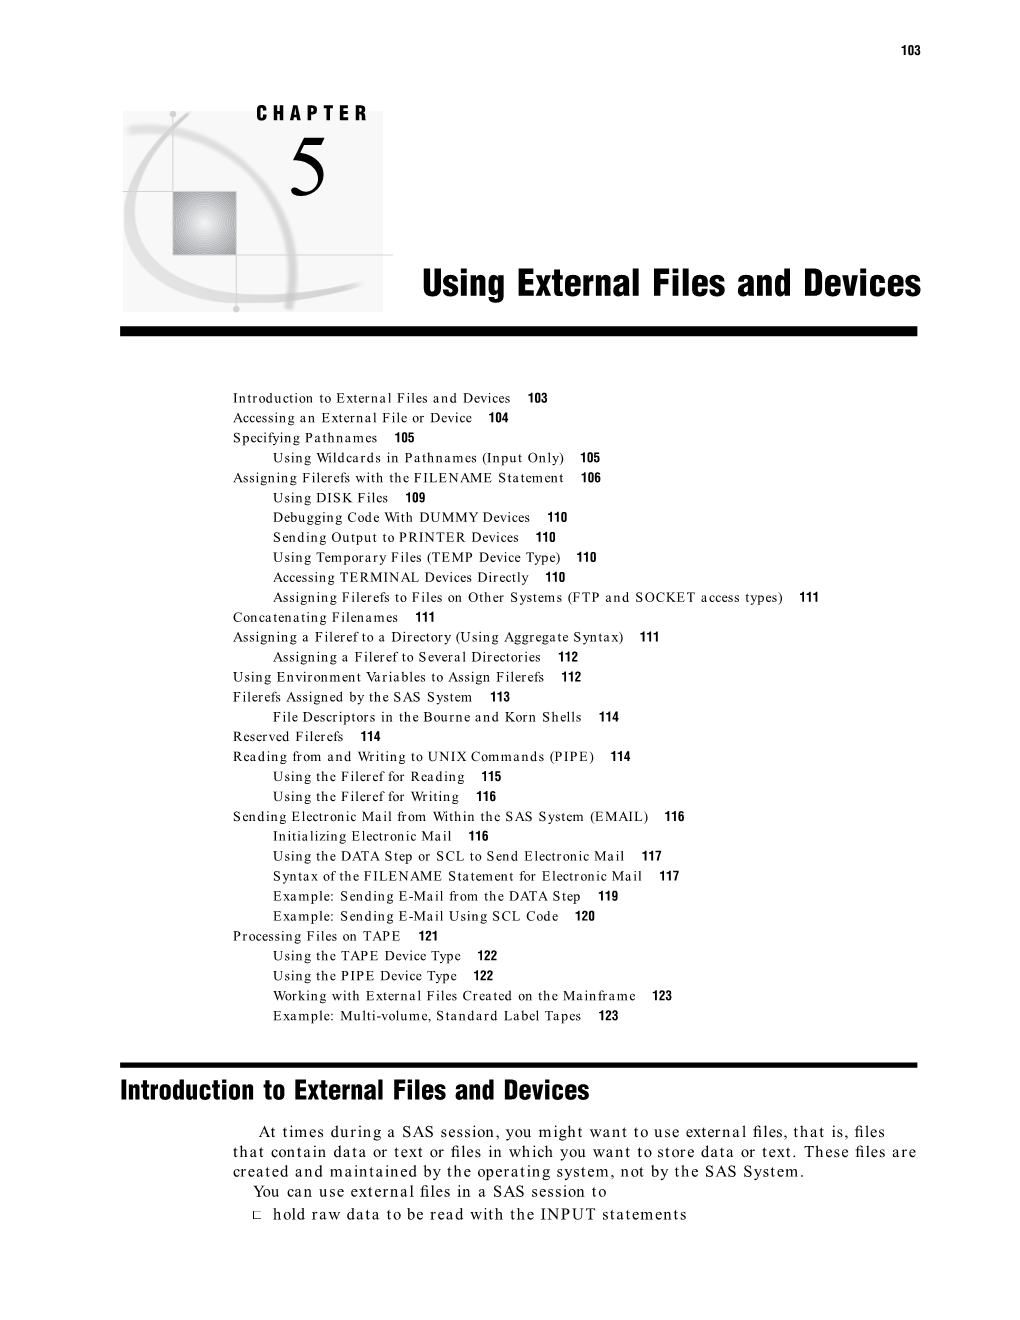 Using External Files and Devices